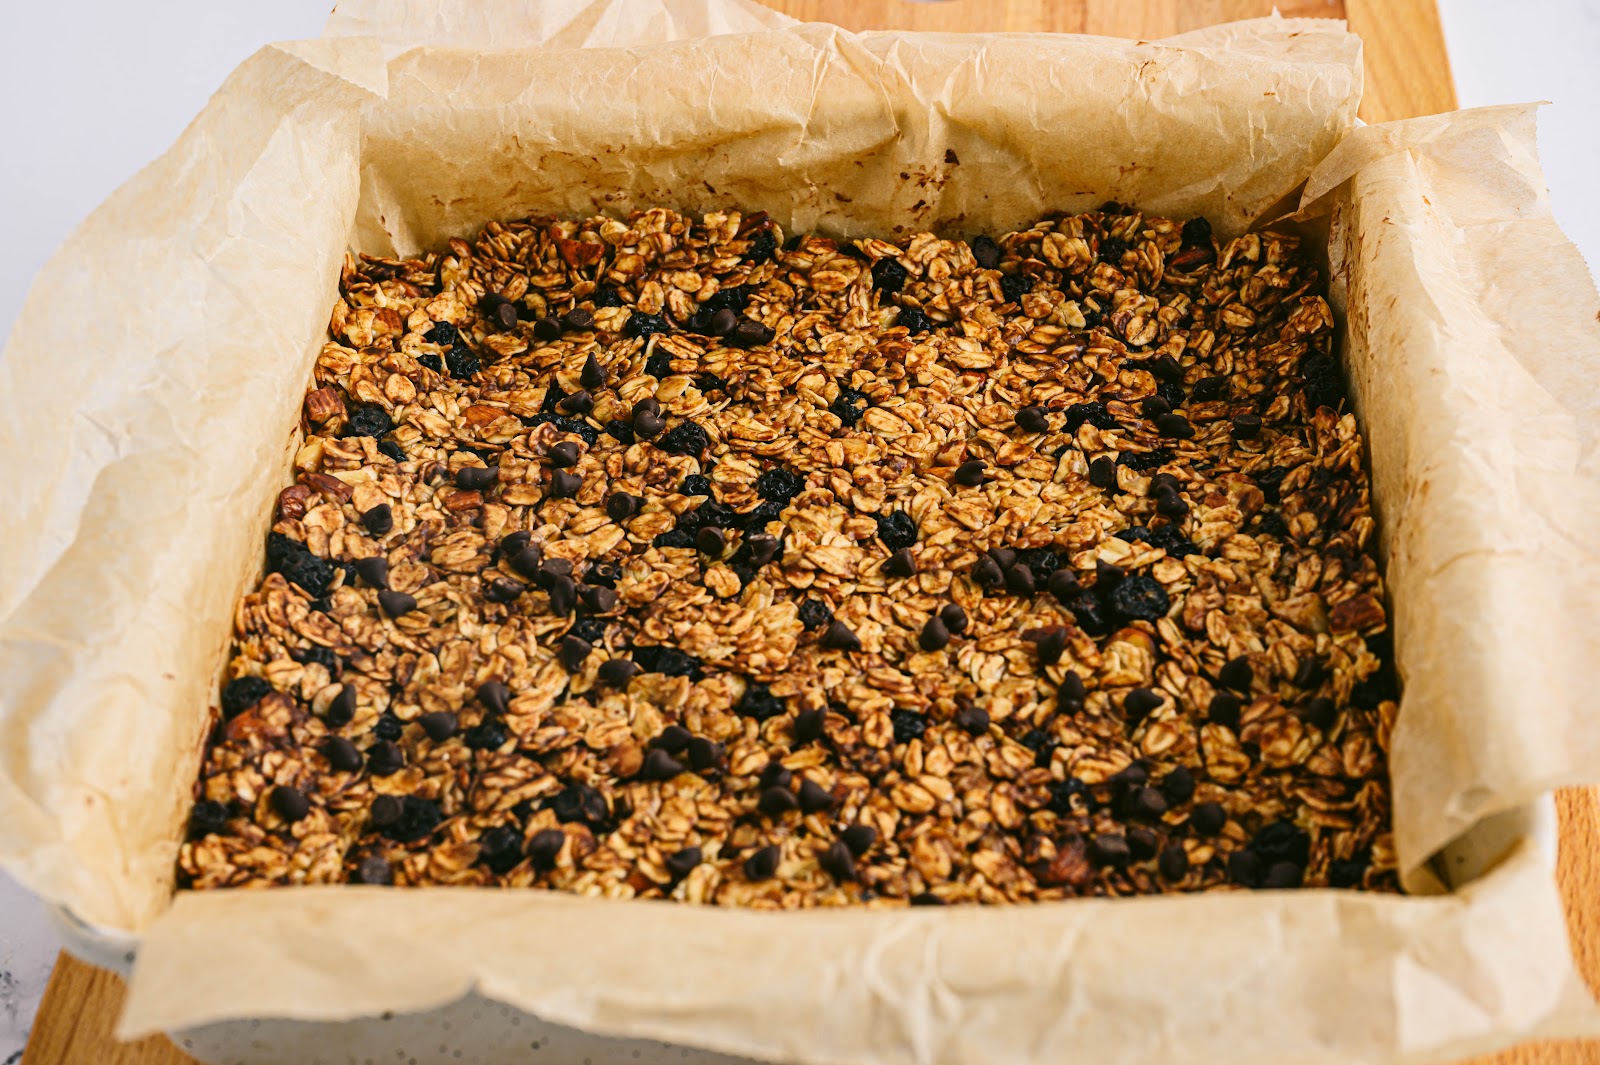 After it’s cooled, pour the entire granola mixture into a lined square baking dish. Let it chill in the fridge for 2 hours.

